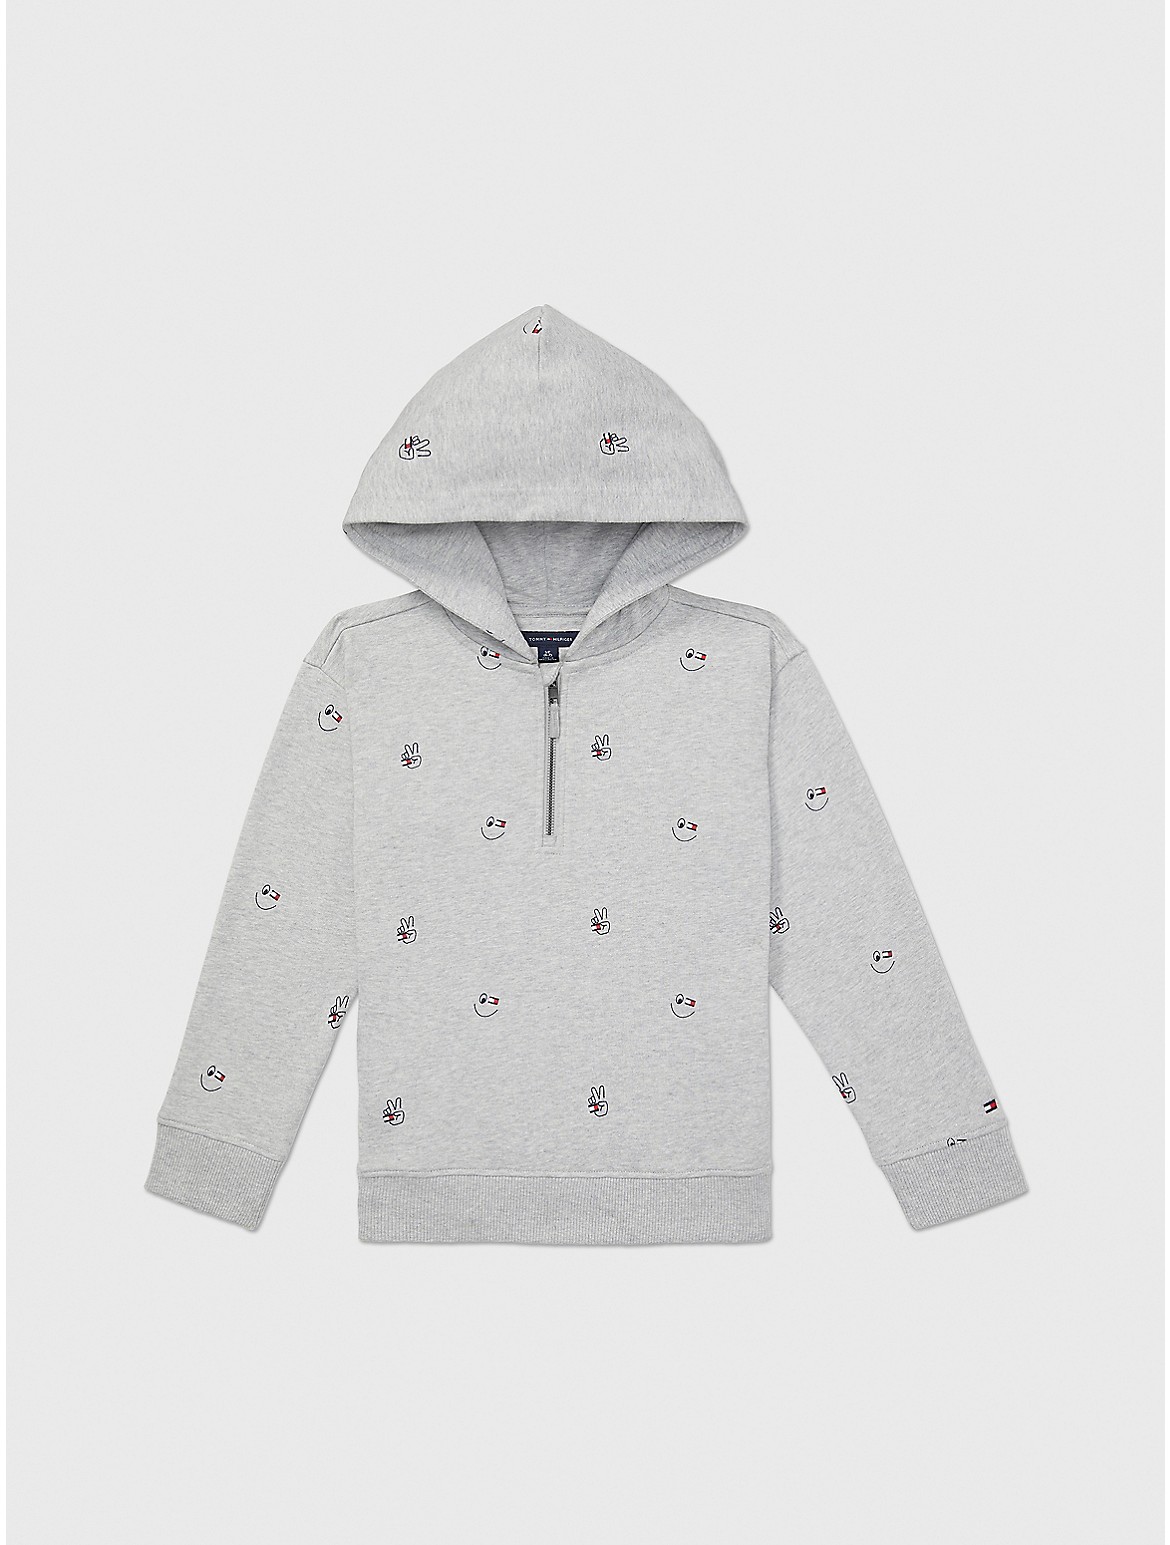 Tommy Hilfiger Boys' Peace and Smiles Critter Hoodie - Grey - XL